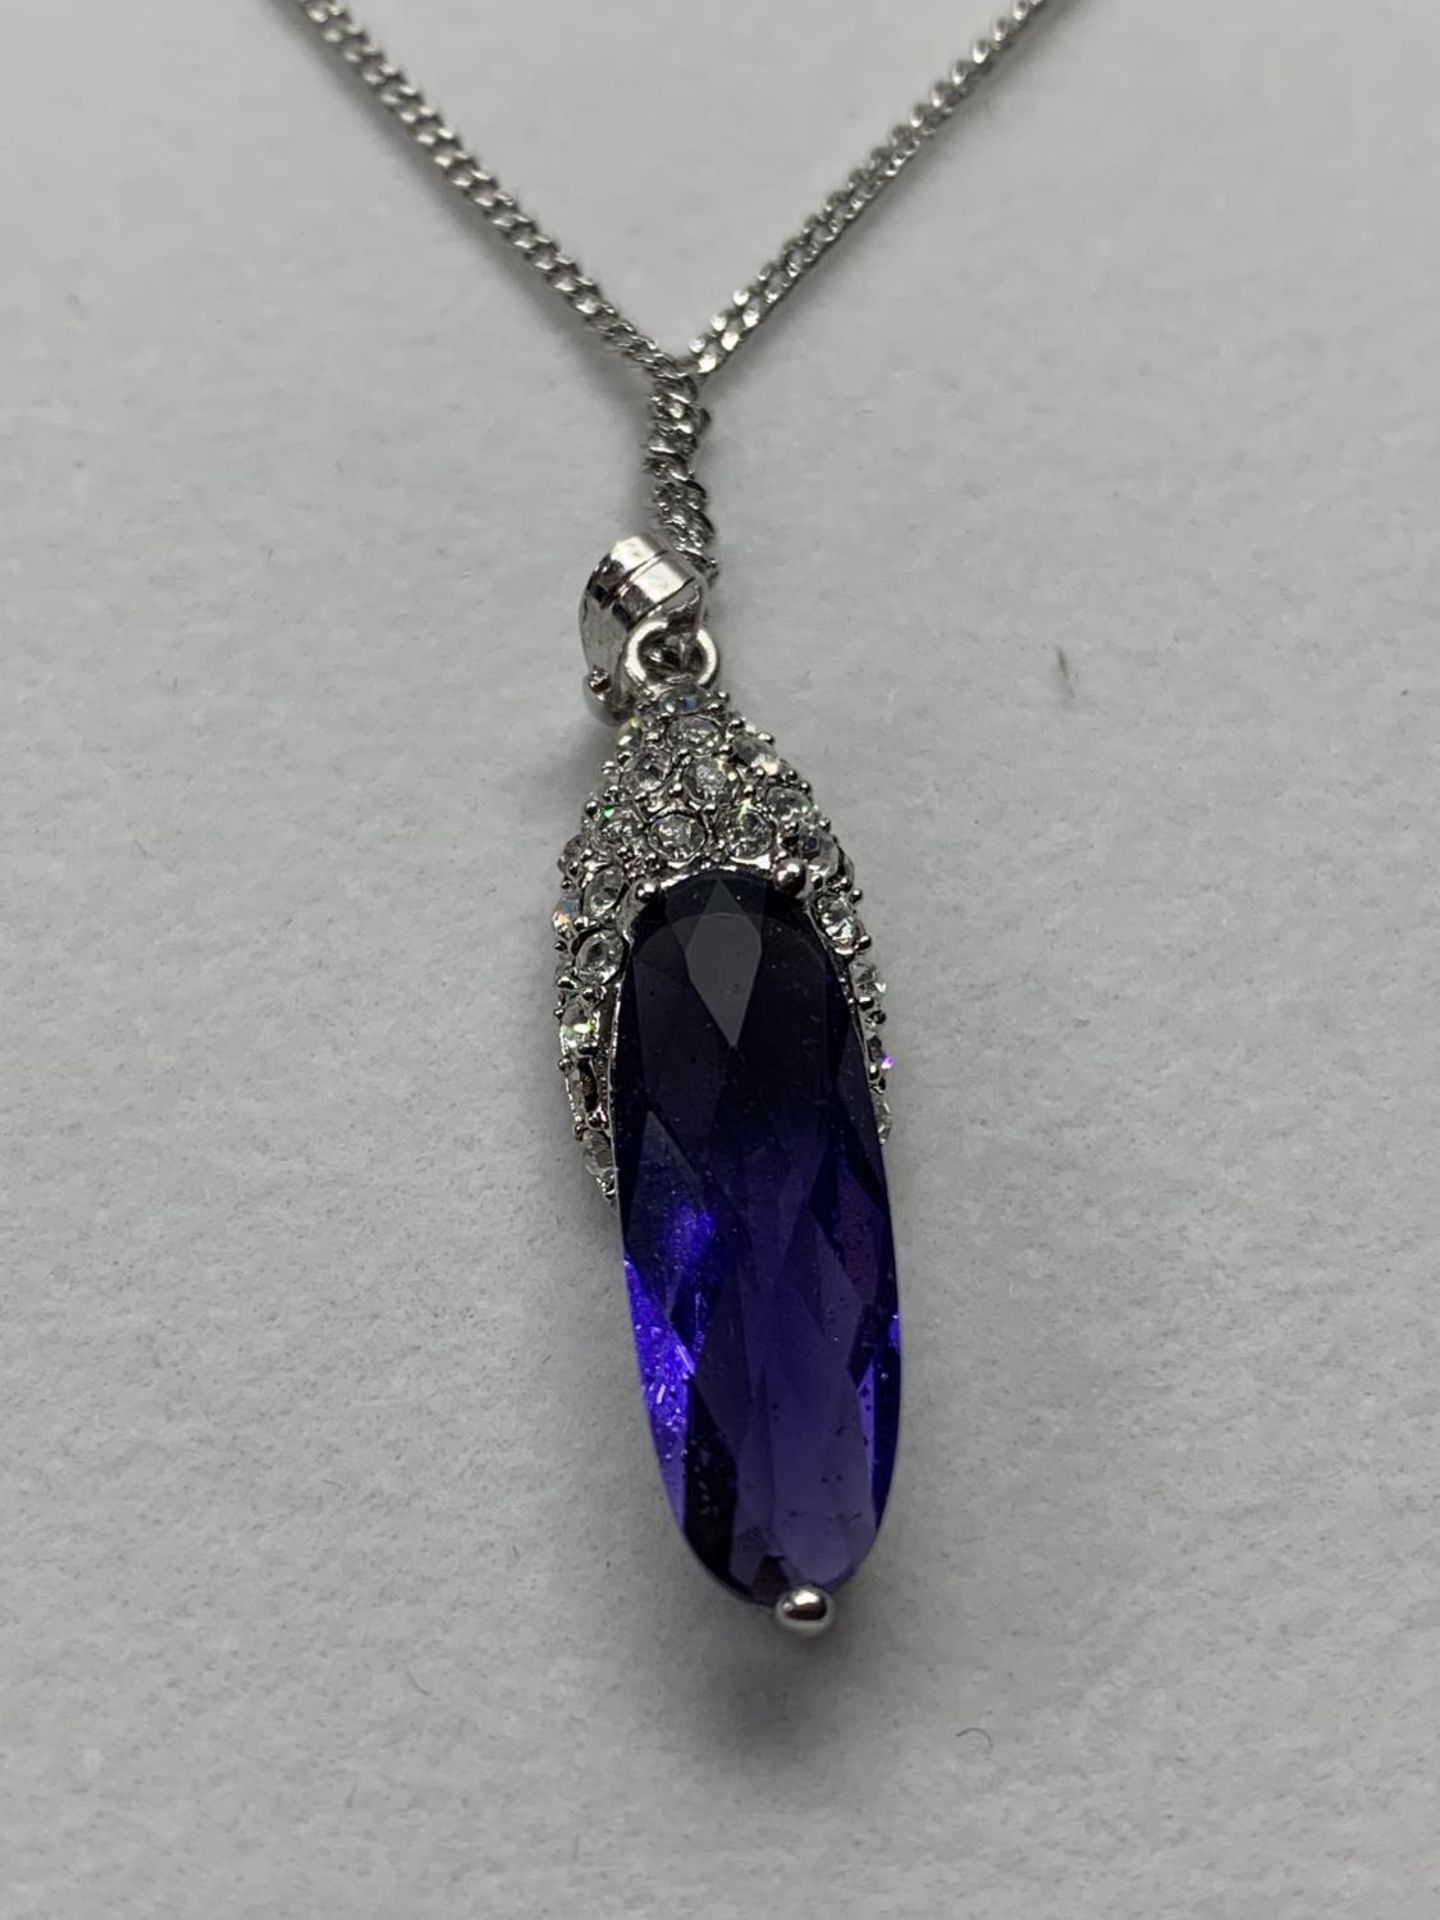 A SILVER NECKLACE WITH A PURPLE STONE PENDANT IN A PRESENTATION BOX - Image 2 of 2